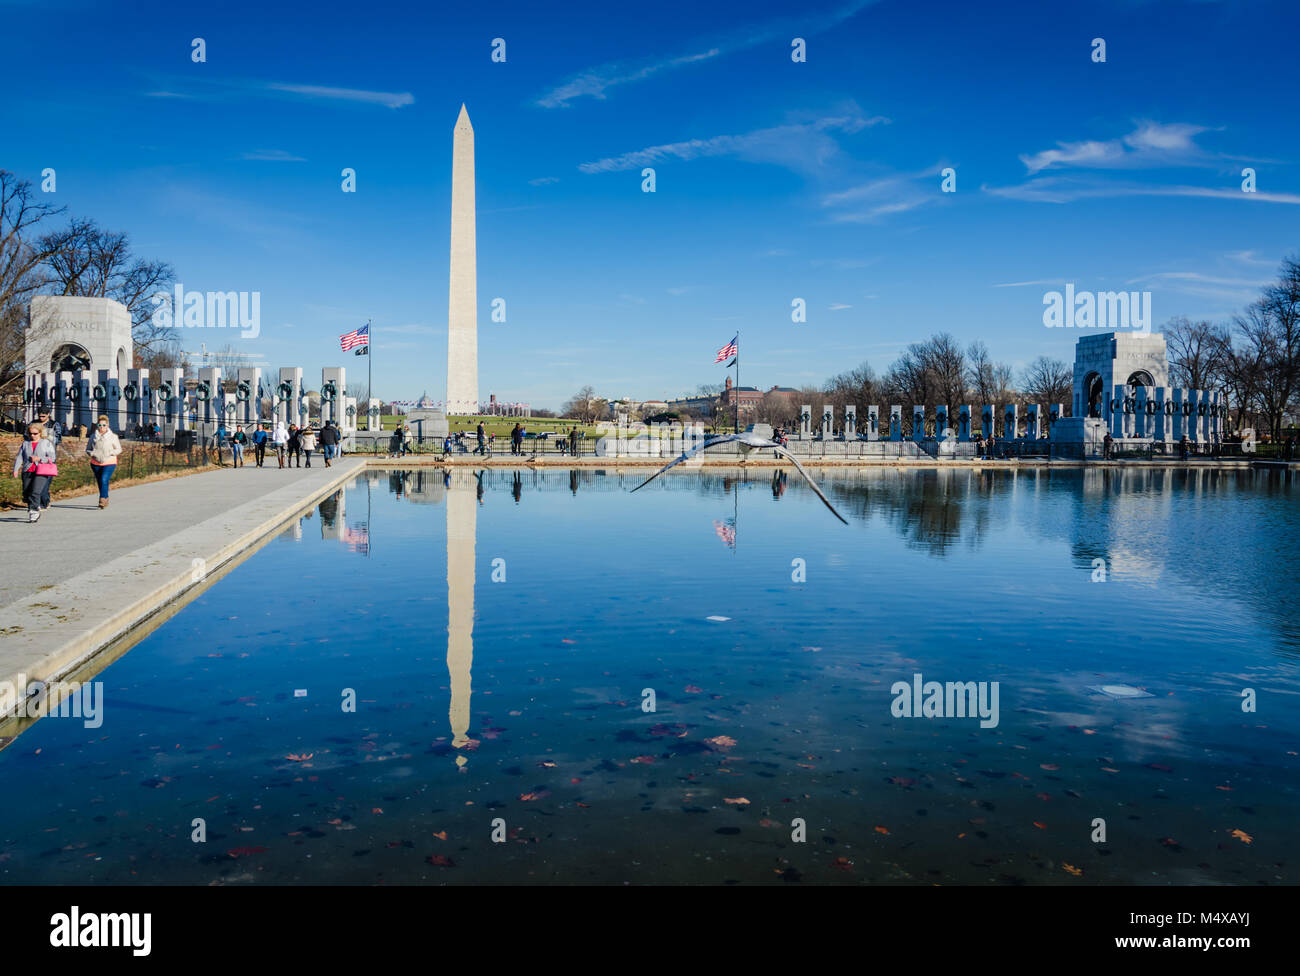 Reflections of Washington Monument, the World War II Memorial, and a Seagull flying on the Reflecting Pool in the National Mall in Washington DC. Stock Photo